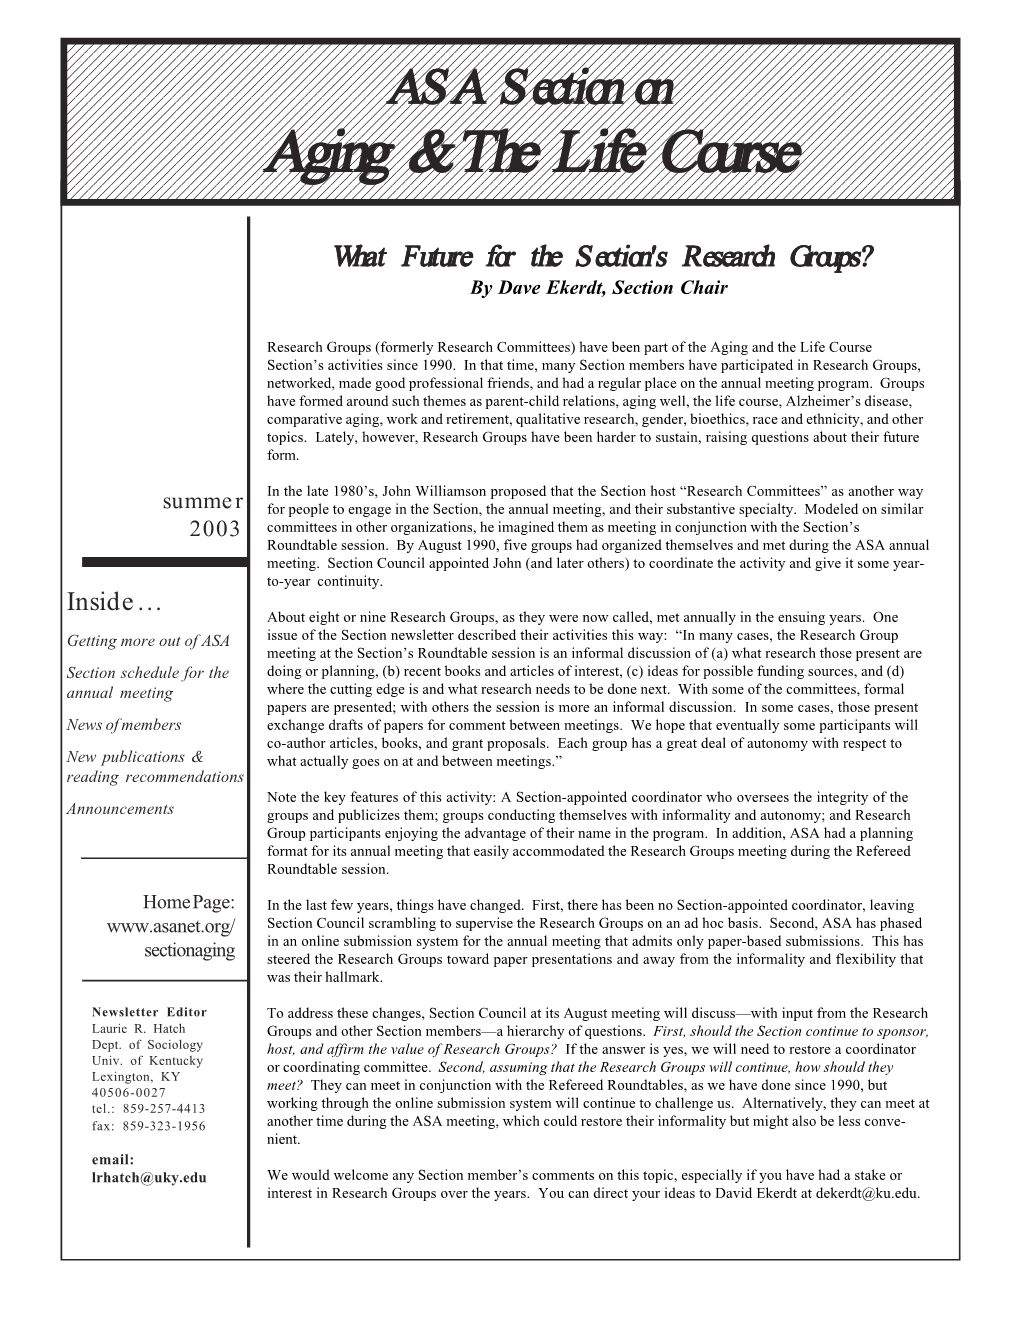 Aging & the Life Course